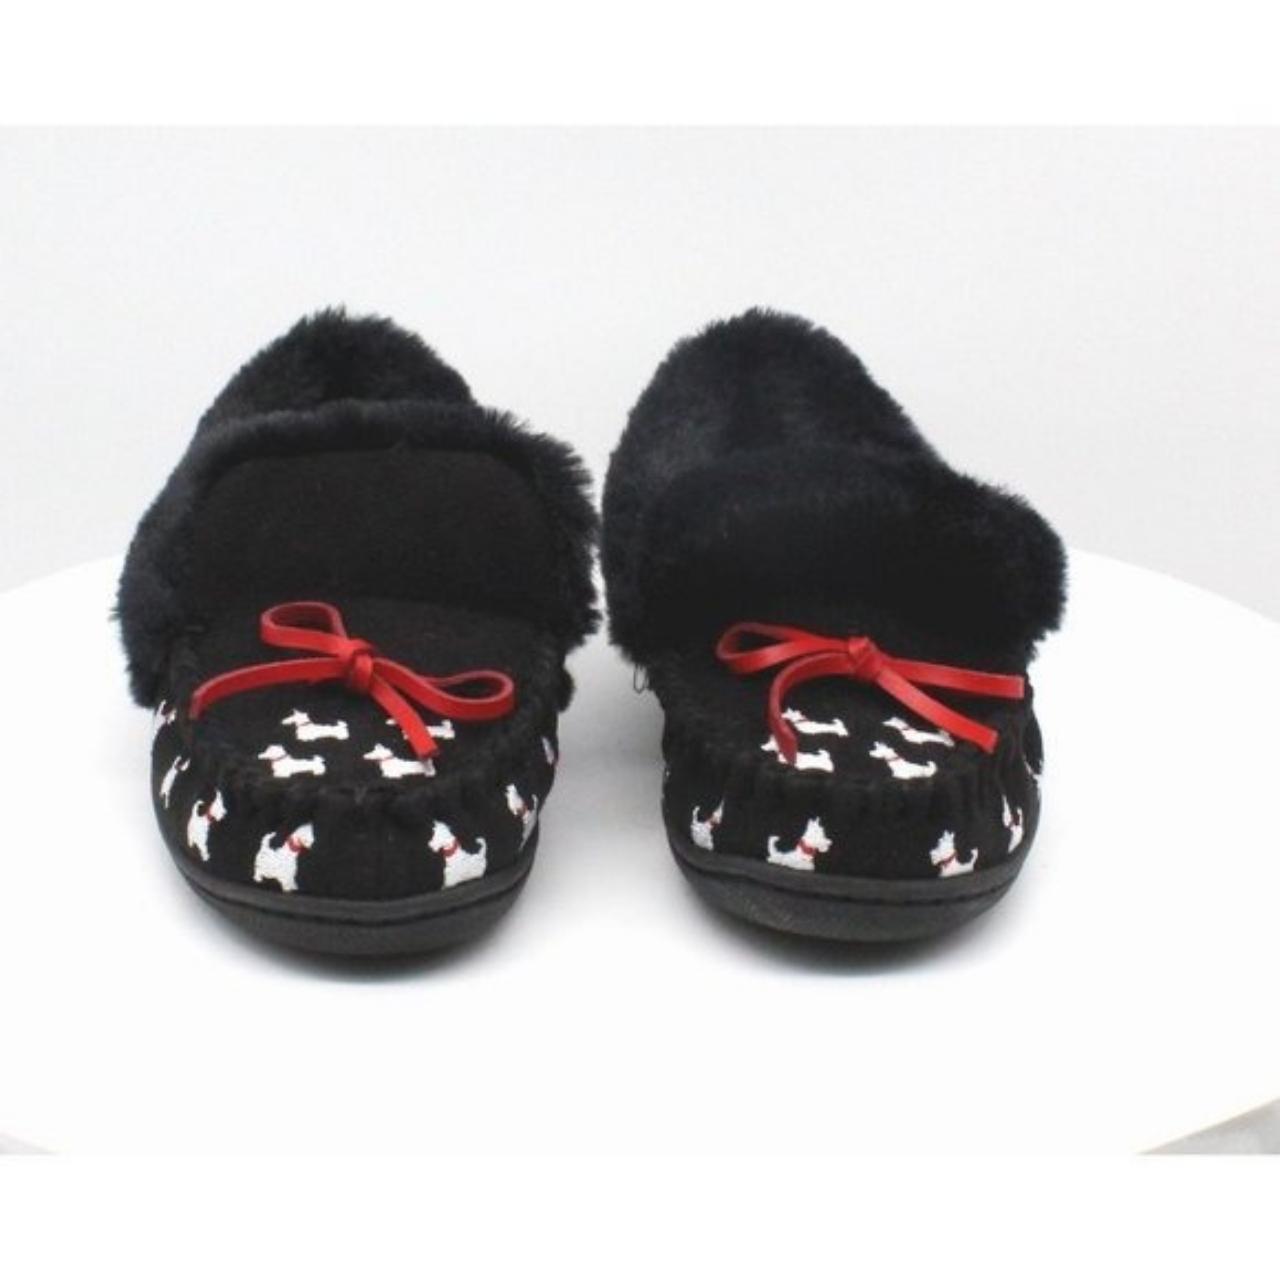 Product Image 4 - Charter Club Dorenda Moccasin Slippers

Help